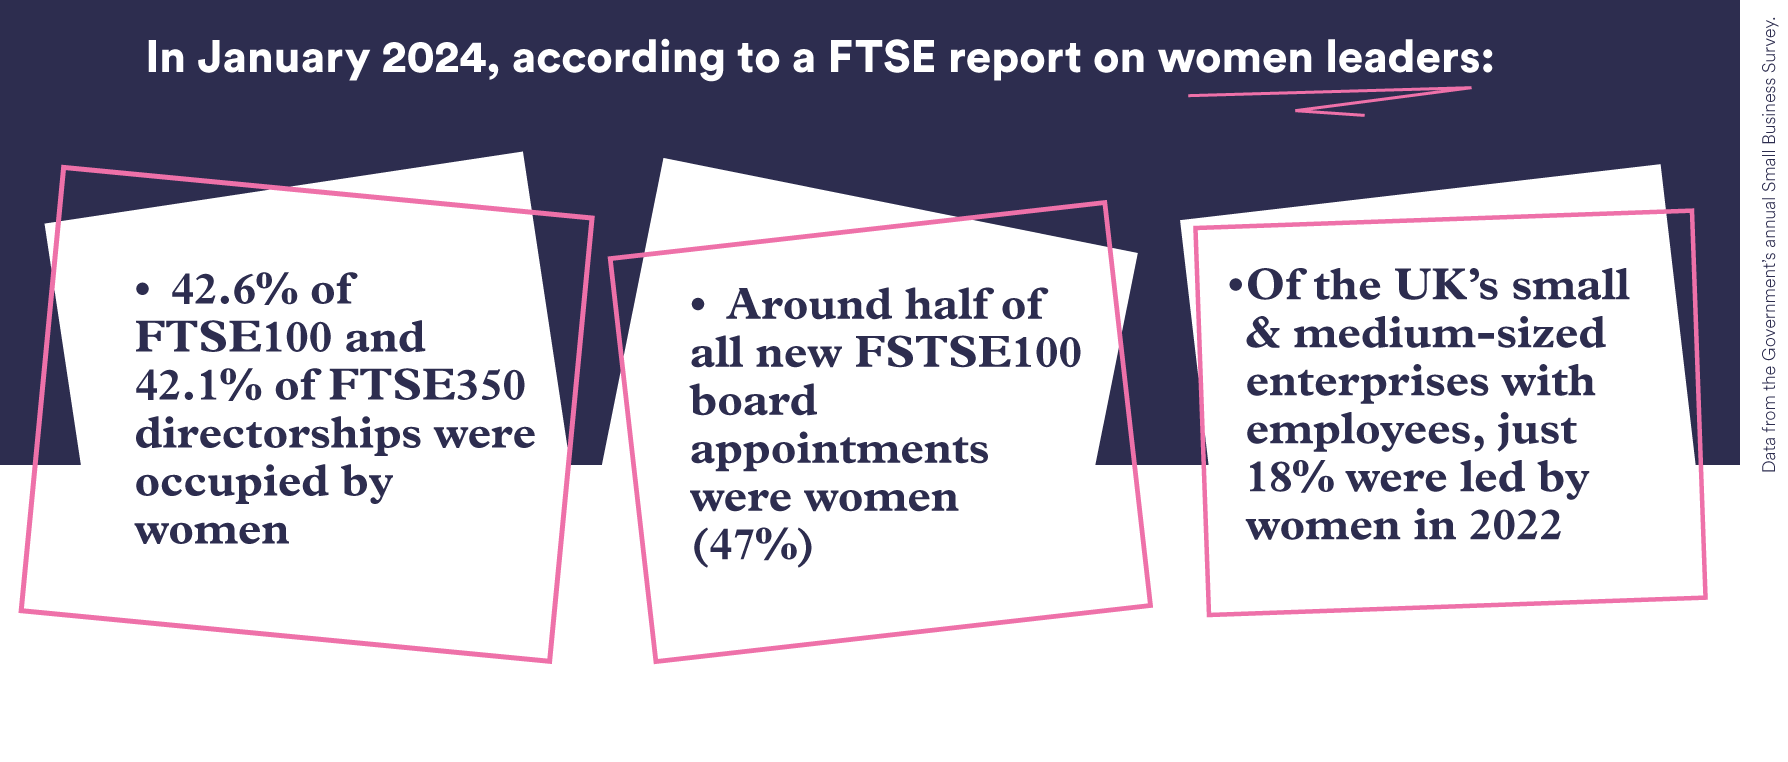 In January 2024, according to a FTSE report on women leaders: • 42.6% of FTSE100 and • 42.1% of FTSE350 directorships were occupied by women. • Around half of all new FSTSE100 board appointments were women (47%). 